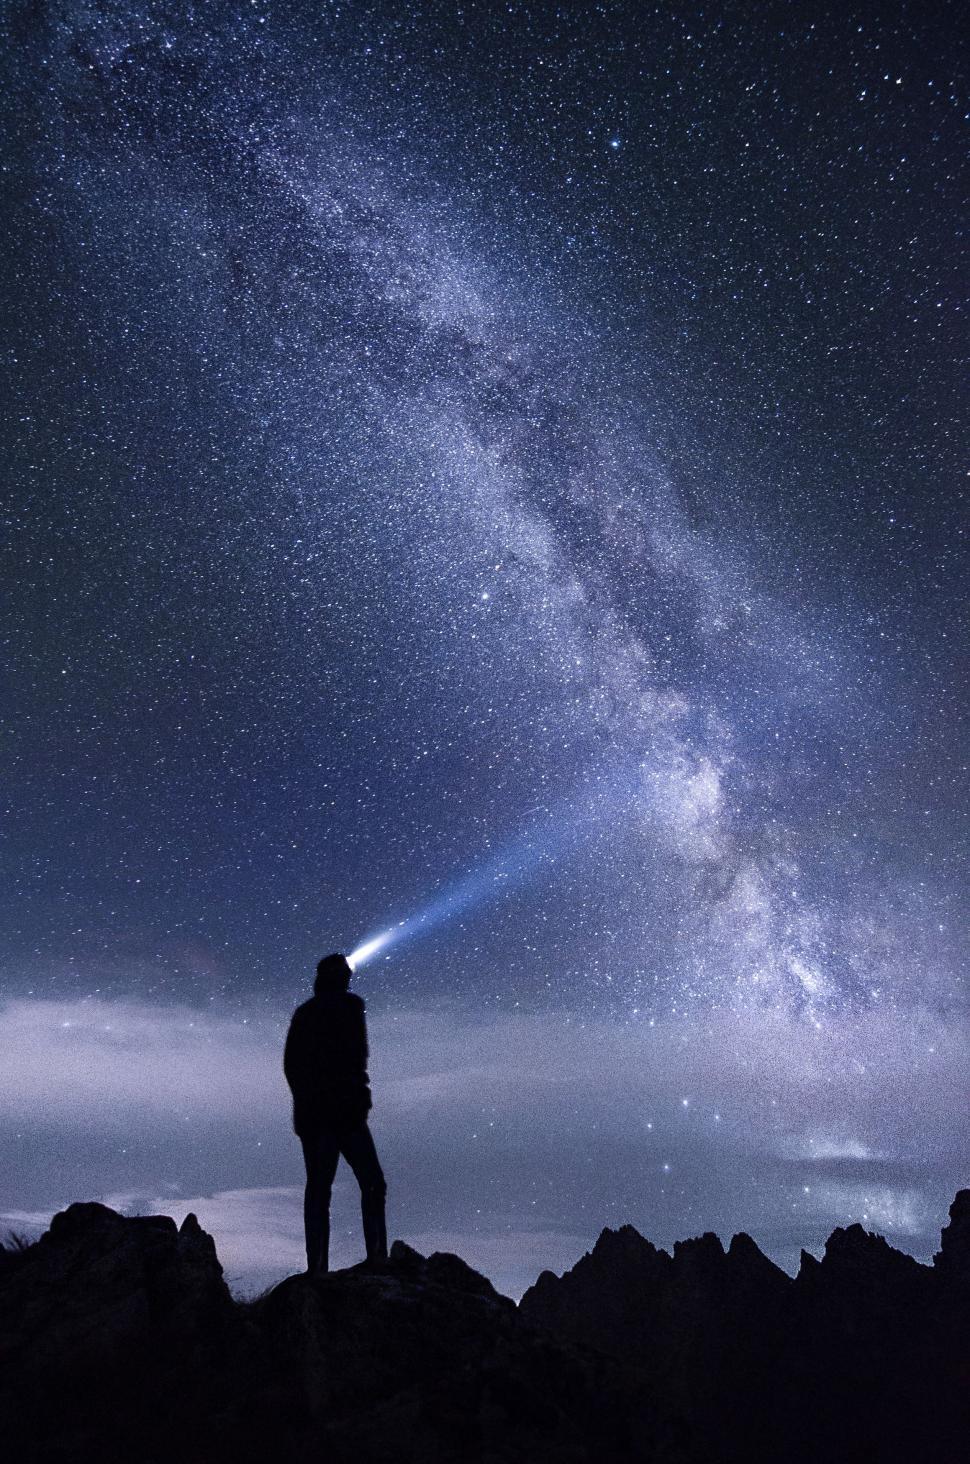 Free Image of Man Standing on Mountain Summit Under Starry Night Sky 